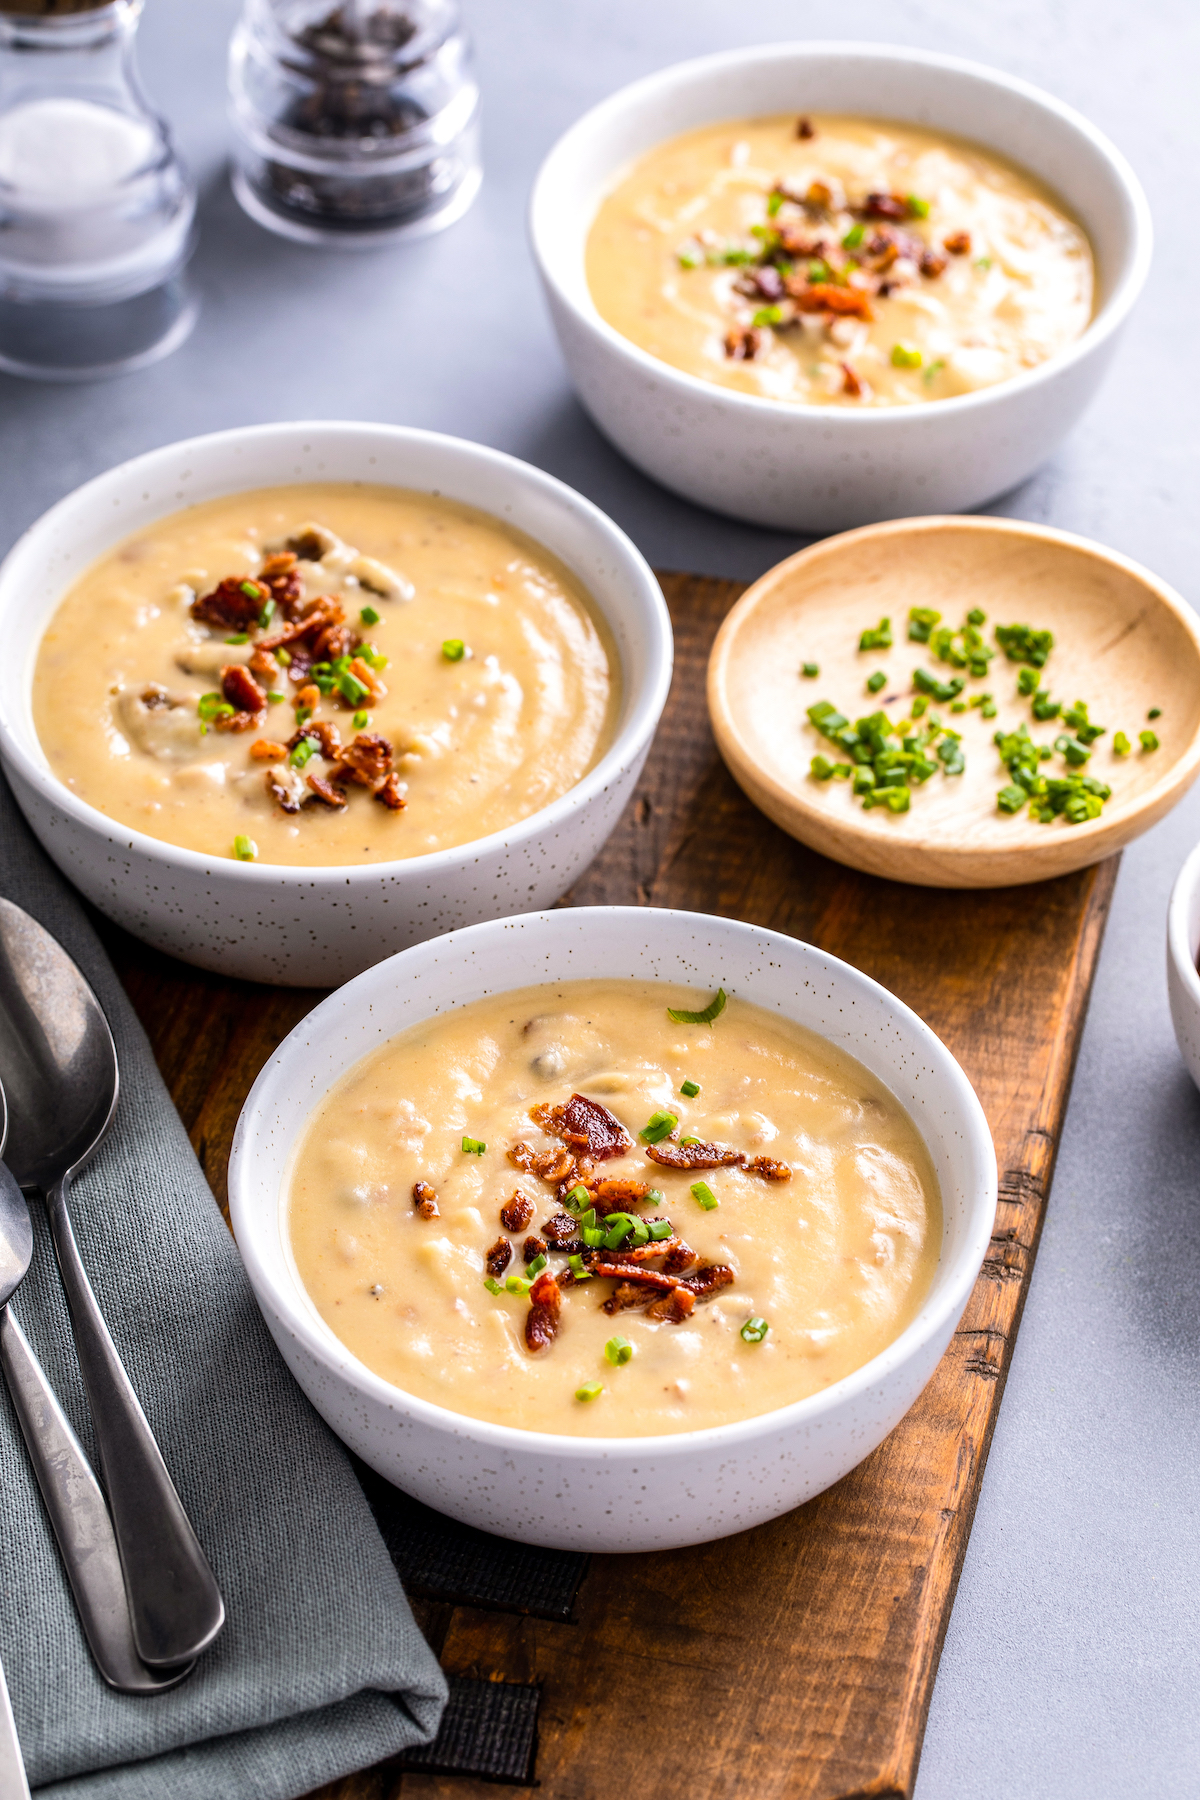 Three bowls of creamy soup on a table, along with